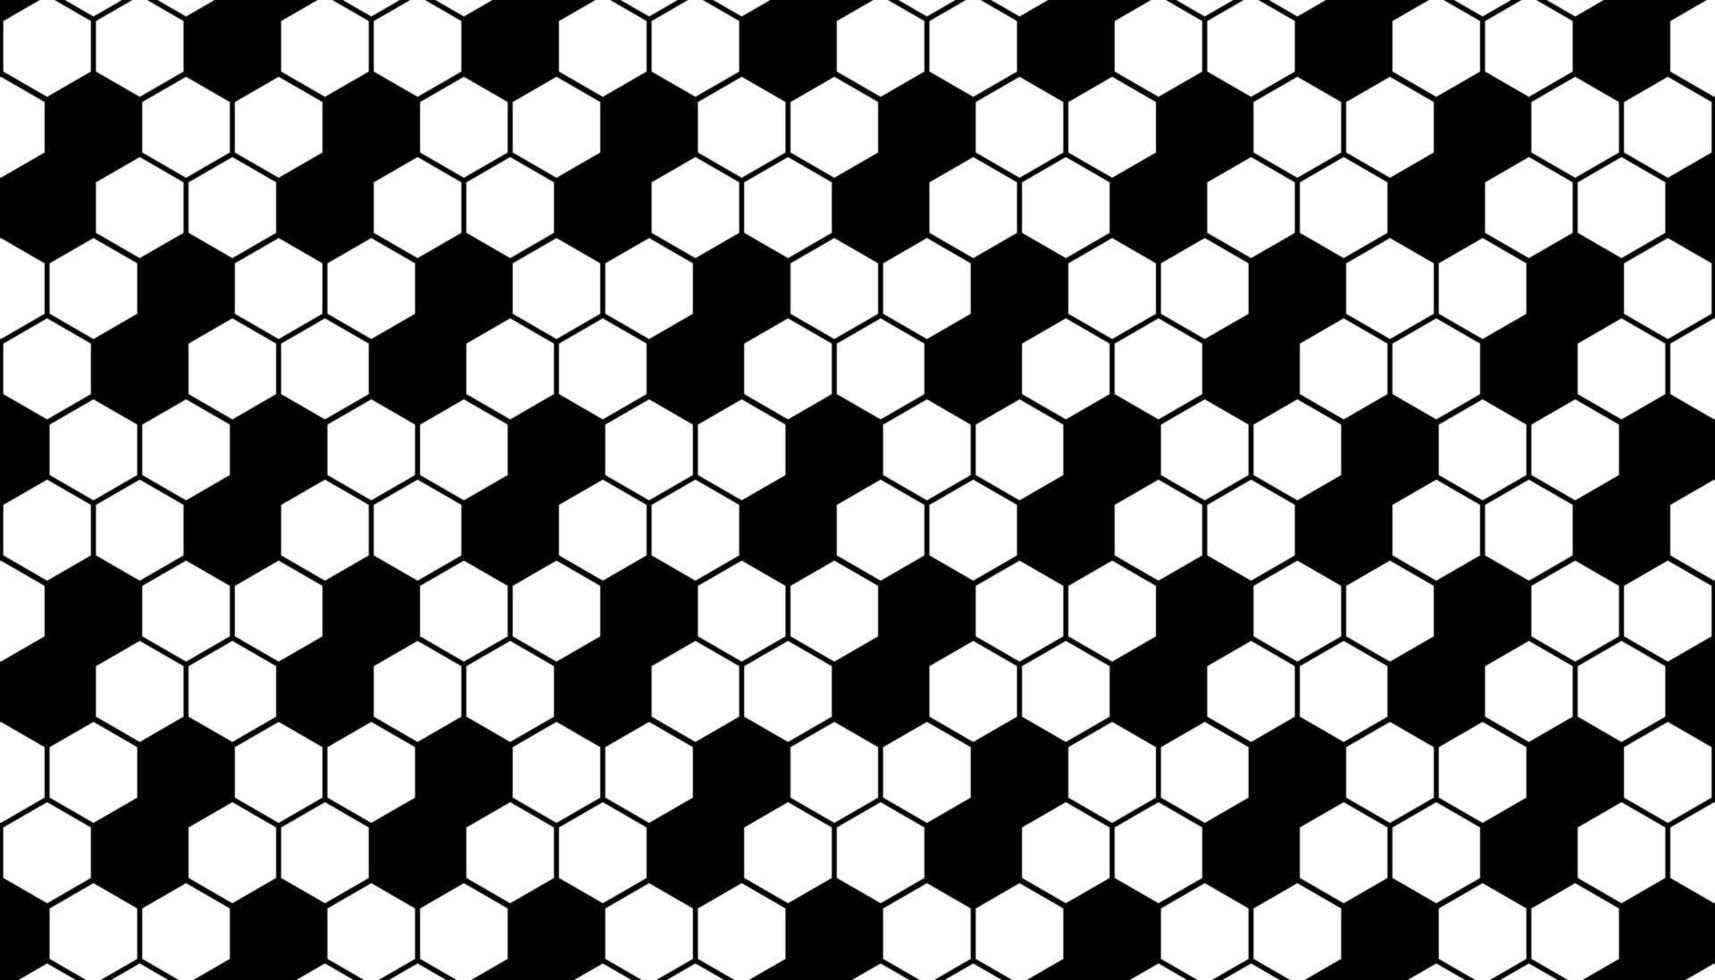 Abstract Hexagonal Pattern Black and White Bee Background vector